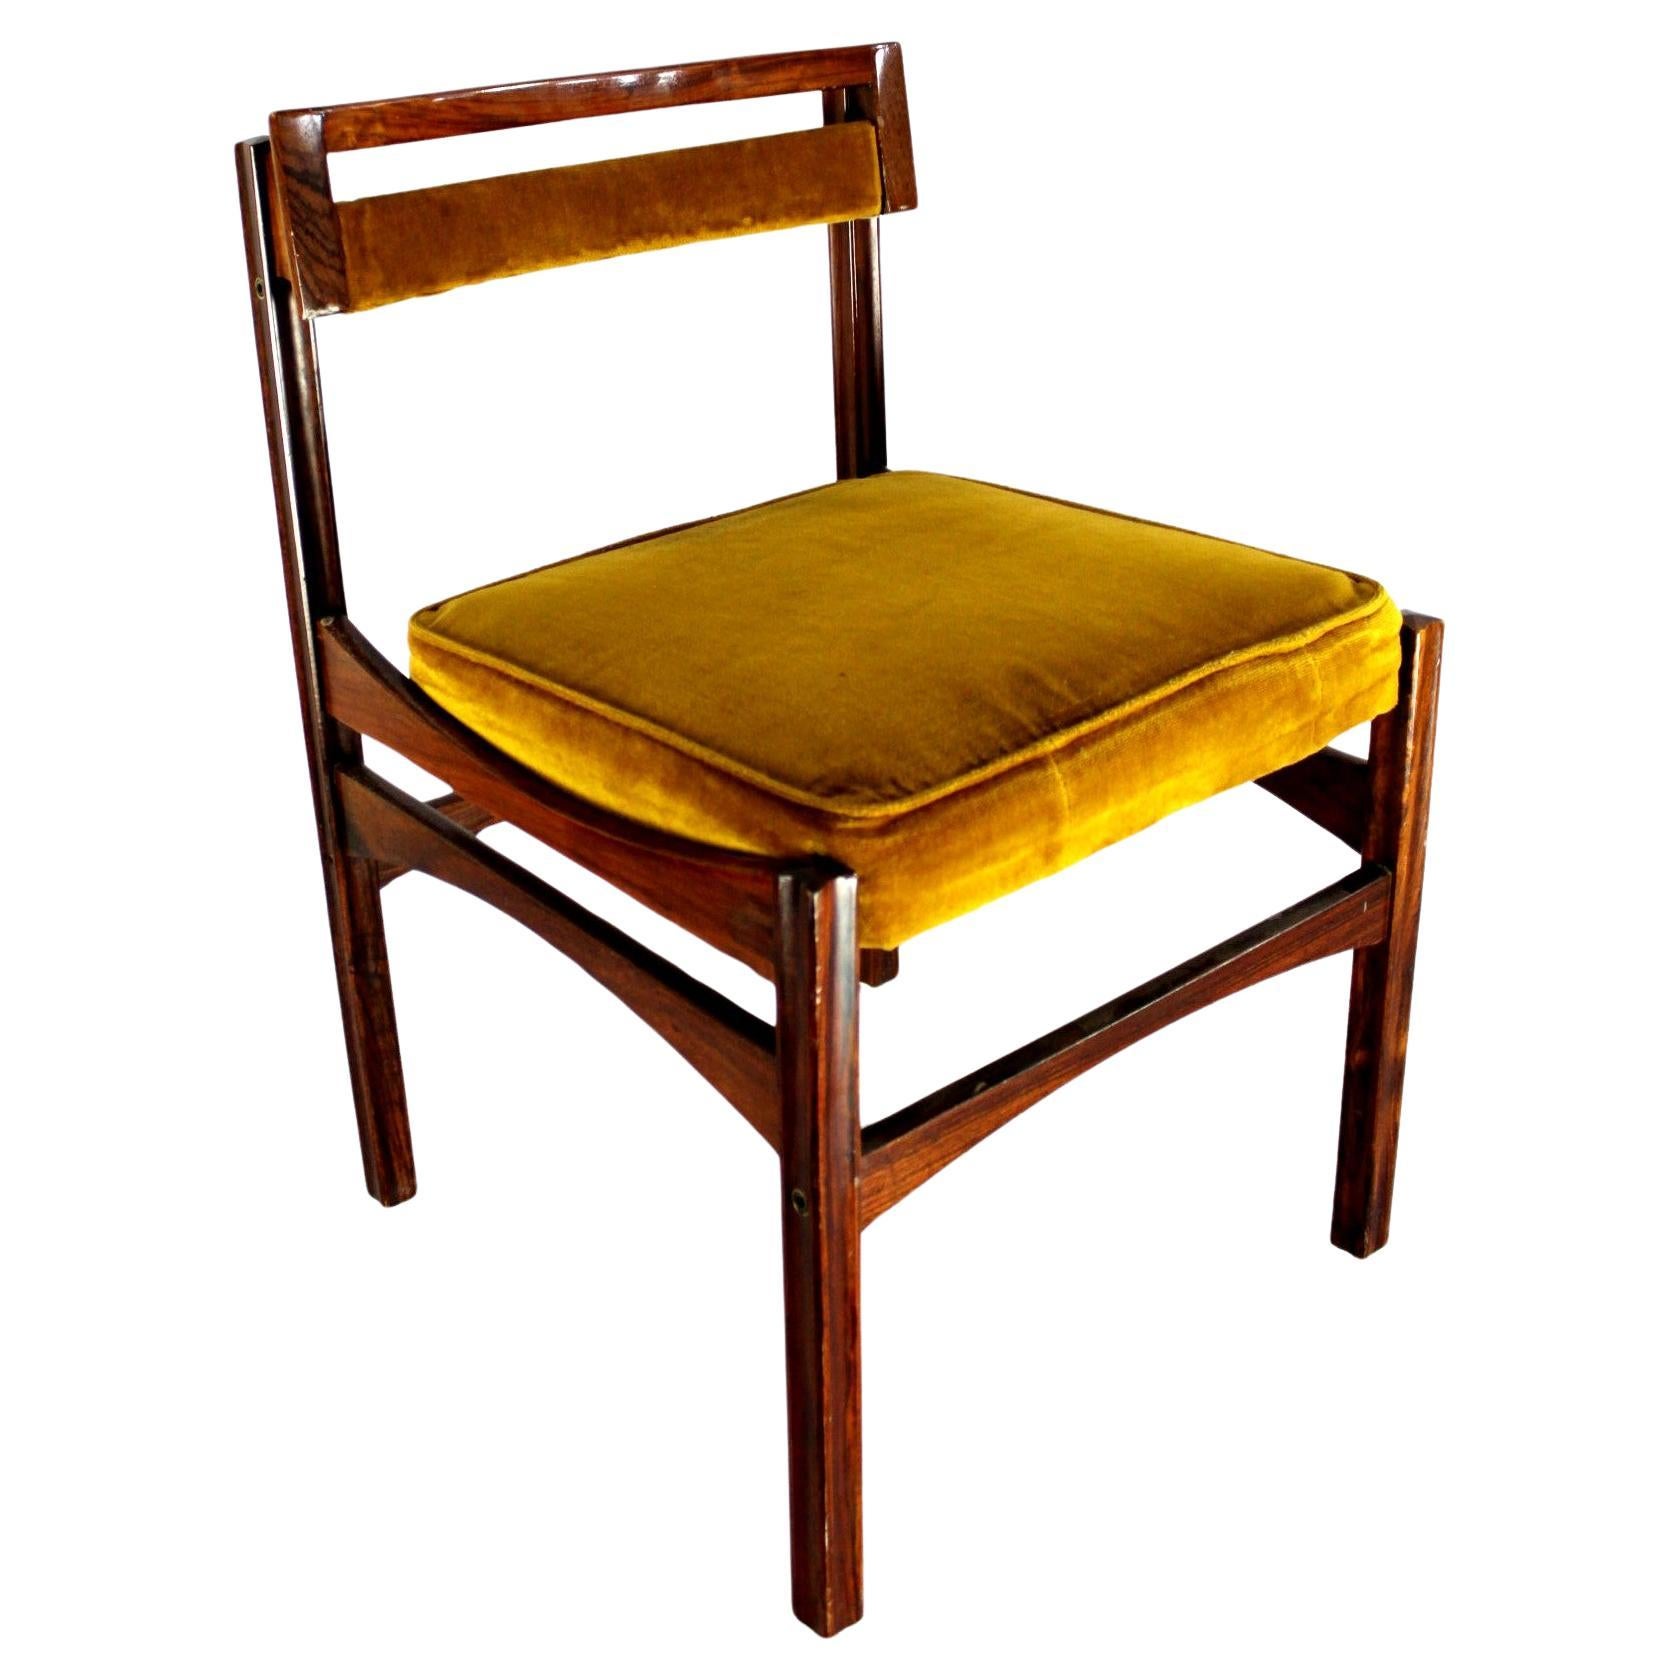 8 unique rosewood chairs sormani incredible quality For Sale